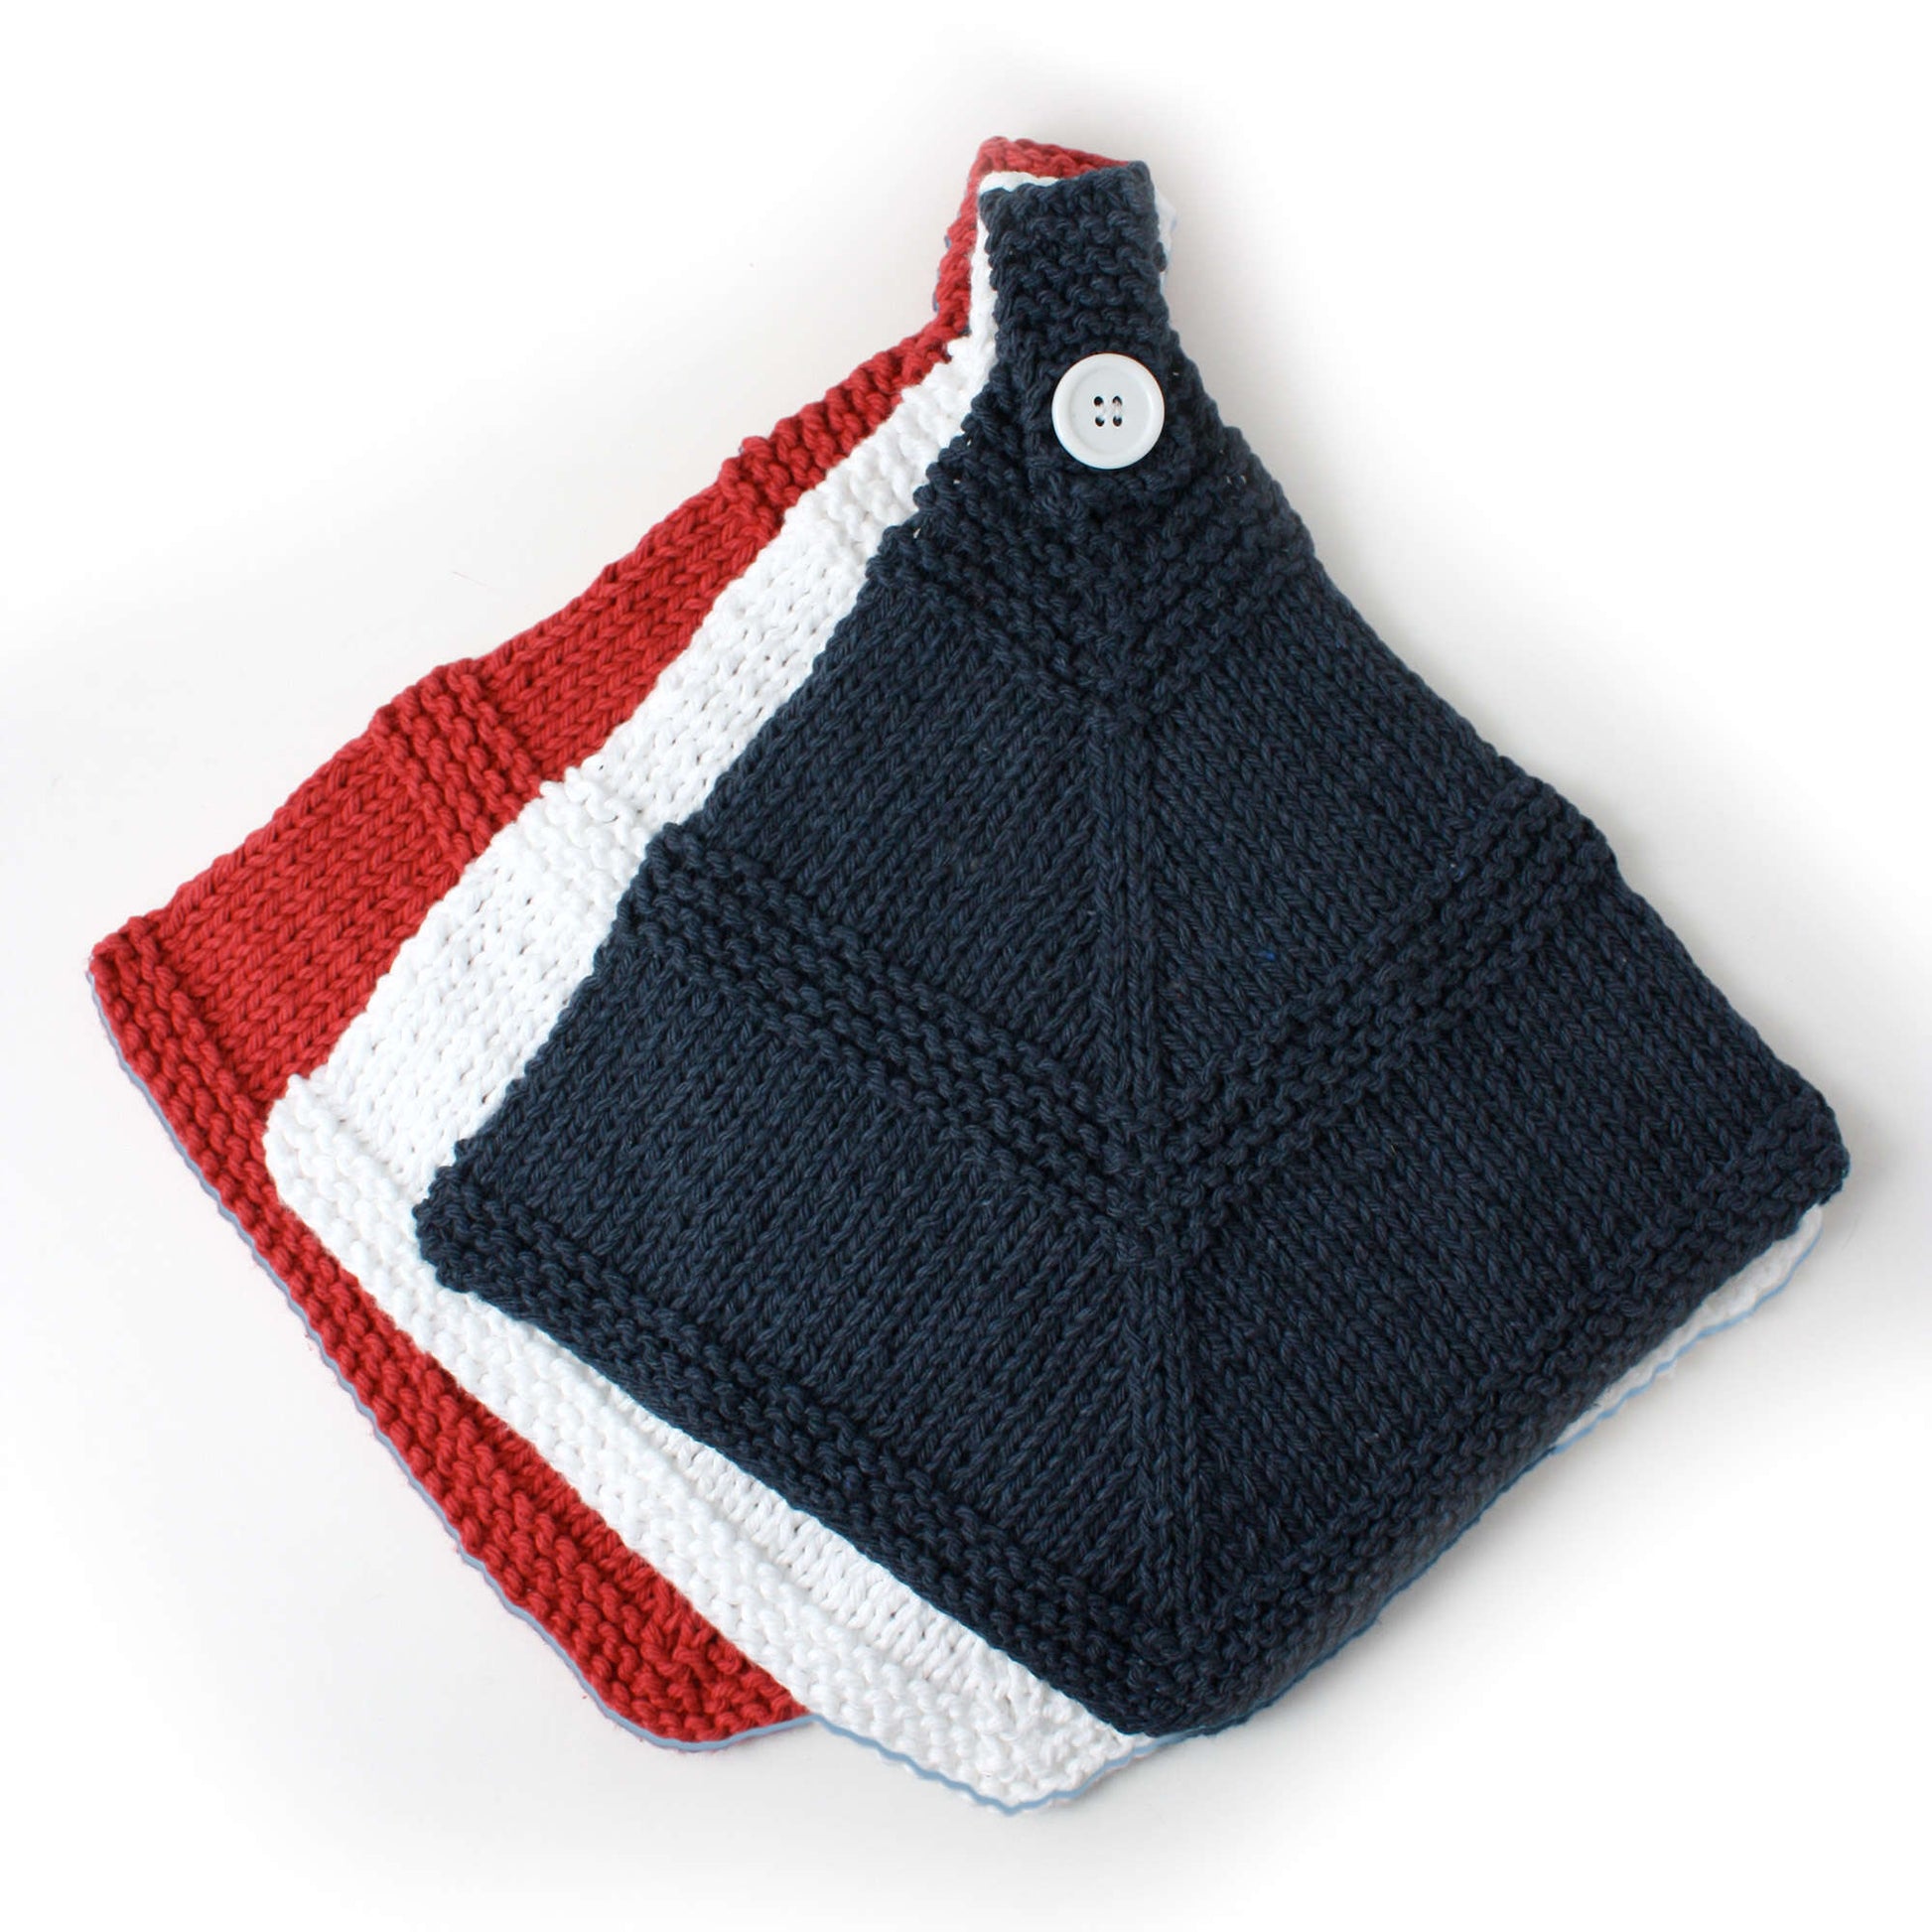 Free Lily Sugar'n Cream Red White and Blue Dishcloth Pattern